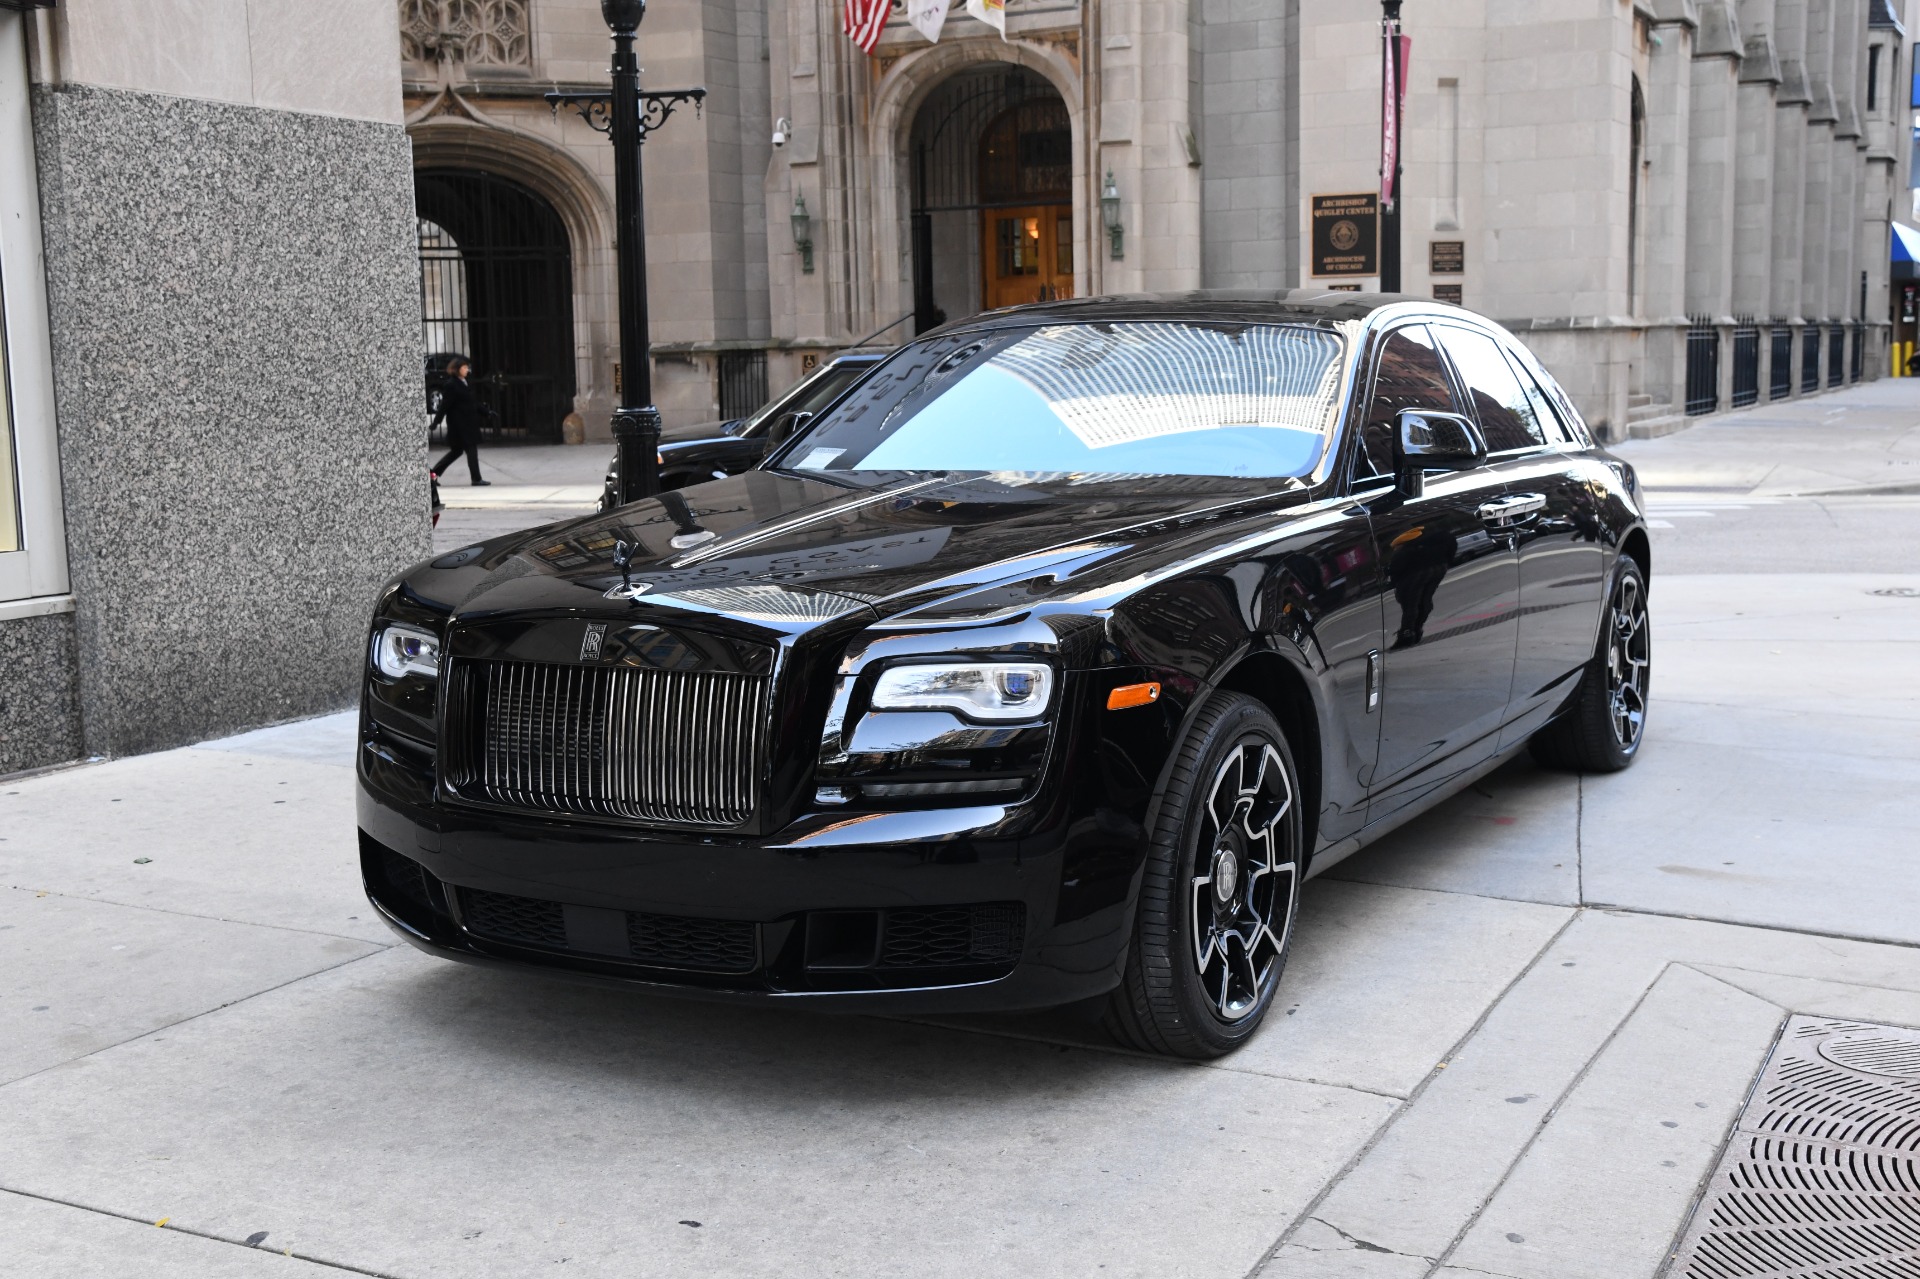 The 2021 Rolls-Royce Ghost: When 'Entry-Level' Costs $330,000